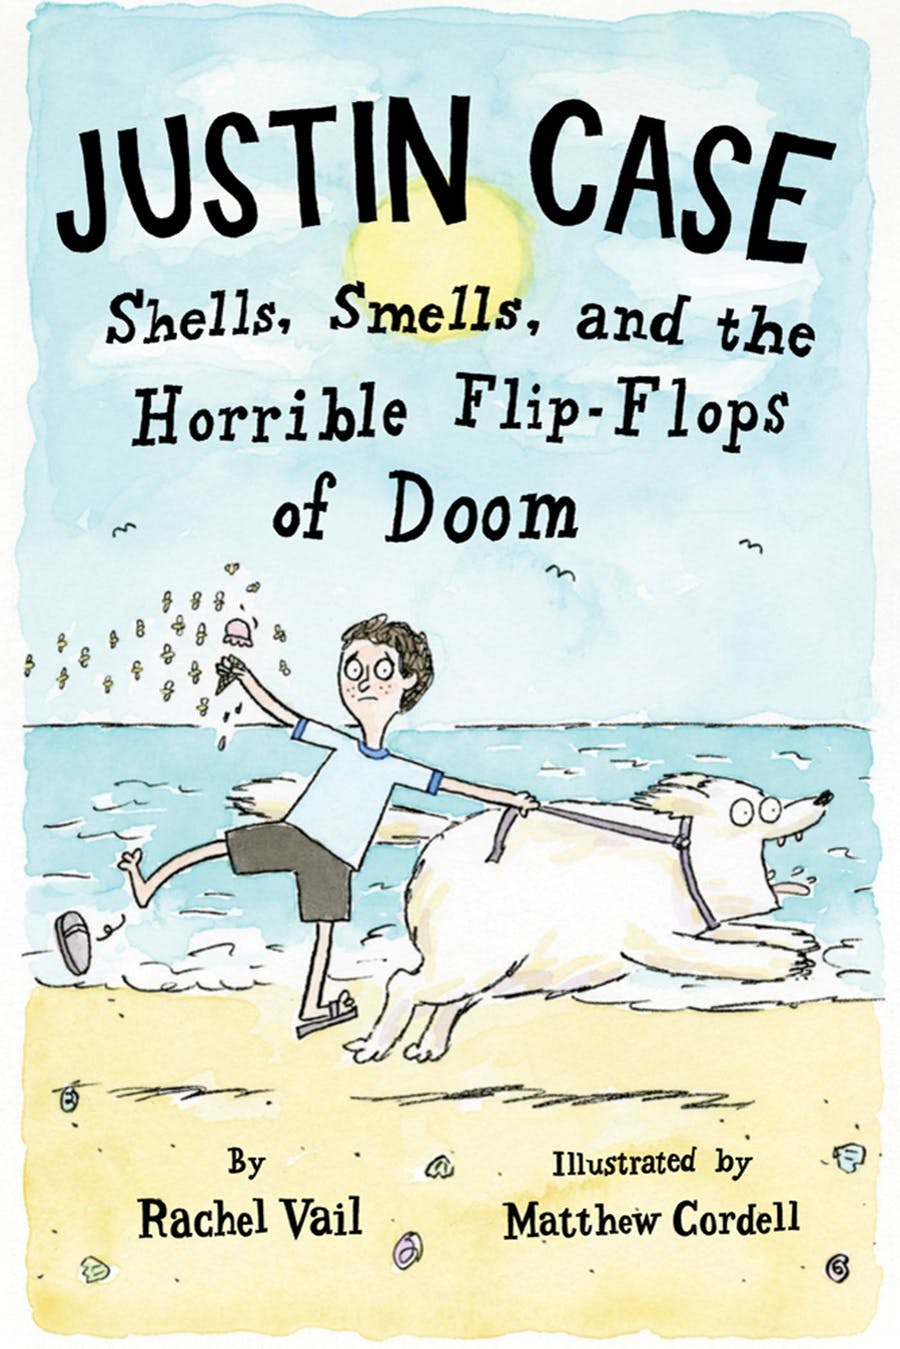 Cover for "Justin Case: Shells, Smells and the Horrible Flip-Flops of Doom"